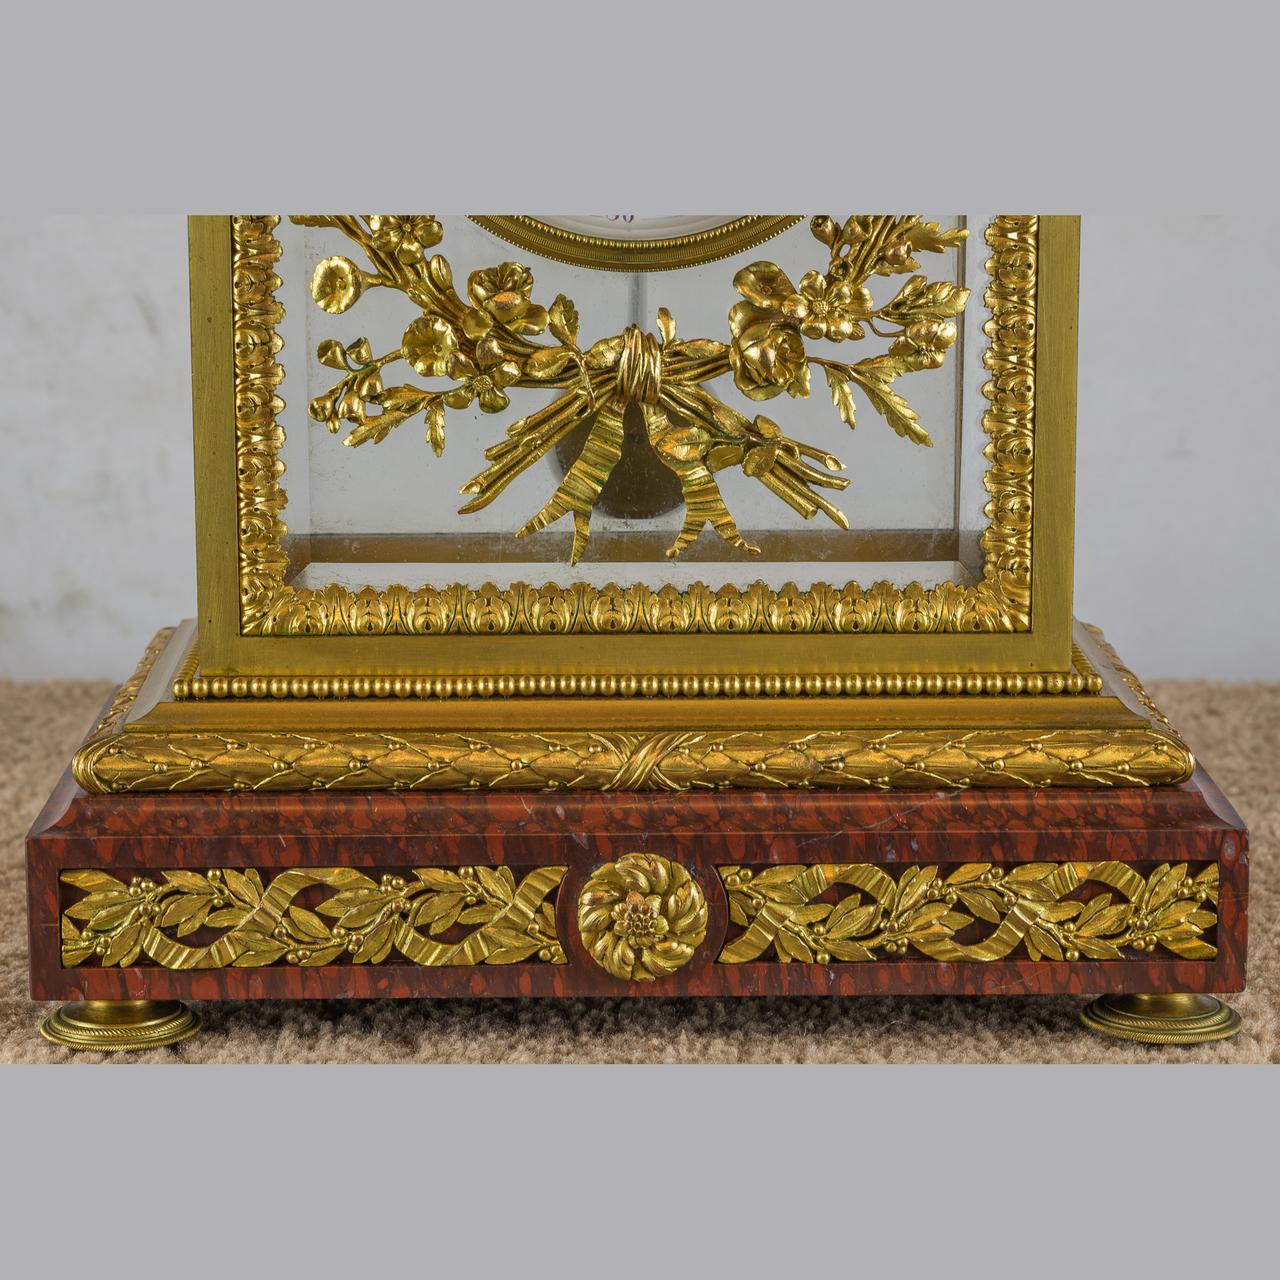 19th Century Gilt Bronze and Rouge Marble Mantel Clock by Lemerle-Charpentier & Cie Paris